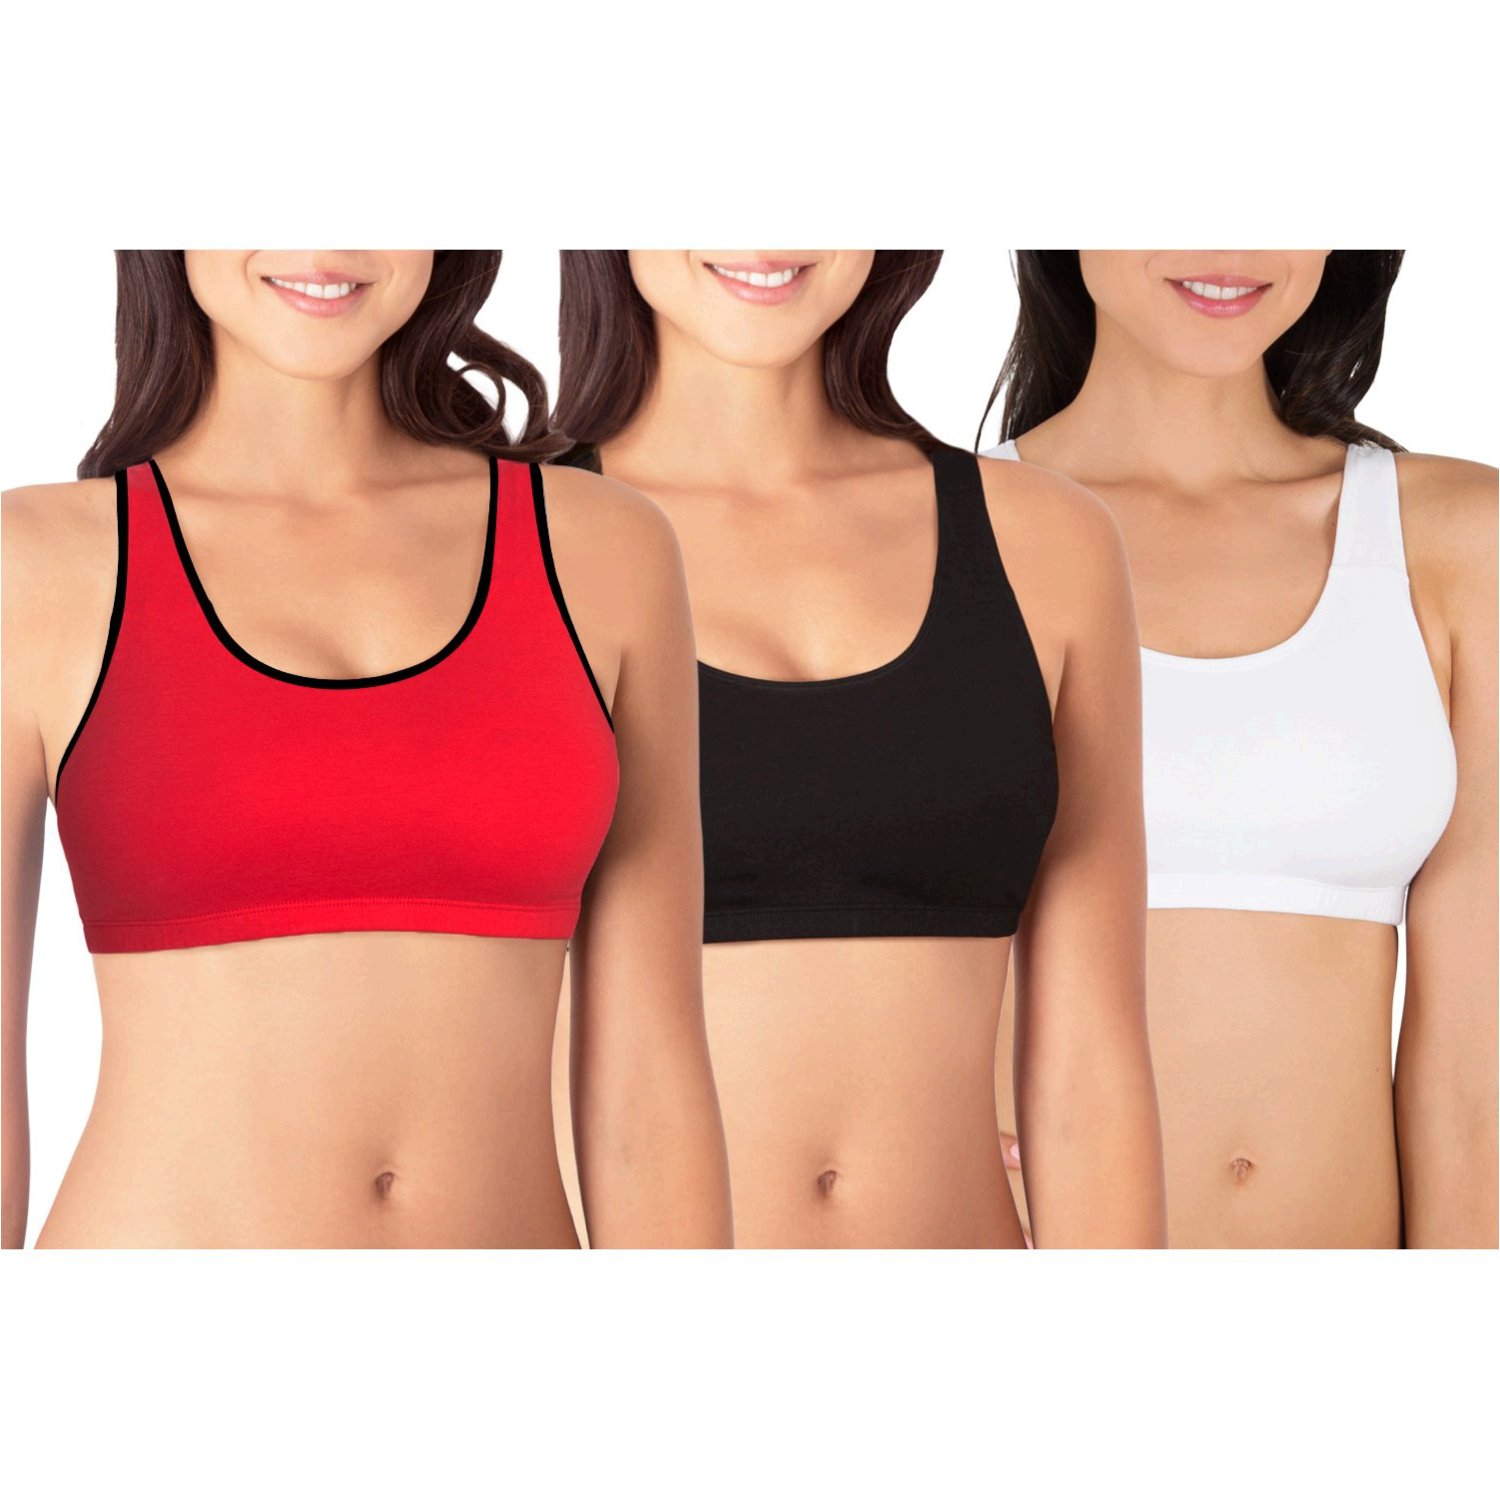 Fruit of the Loom Womens Built-up Sports Bra, Red Hot with, MultiColor